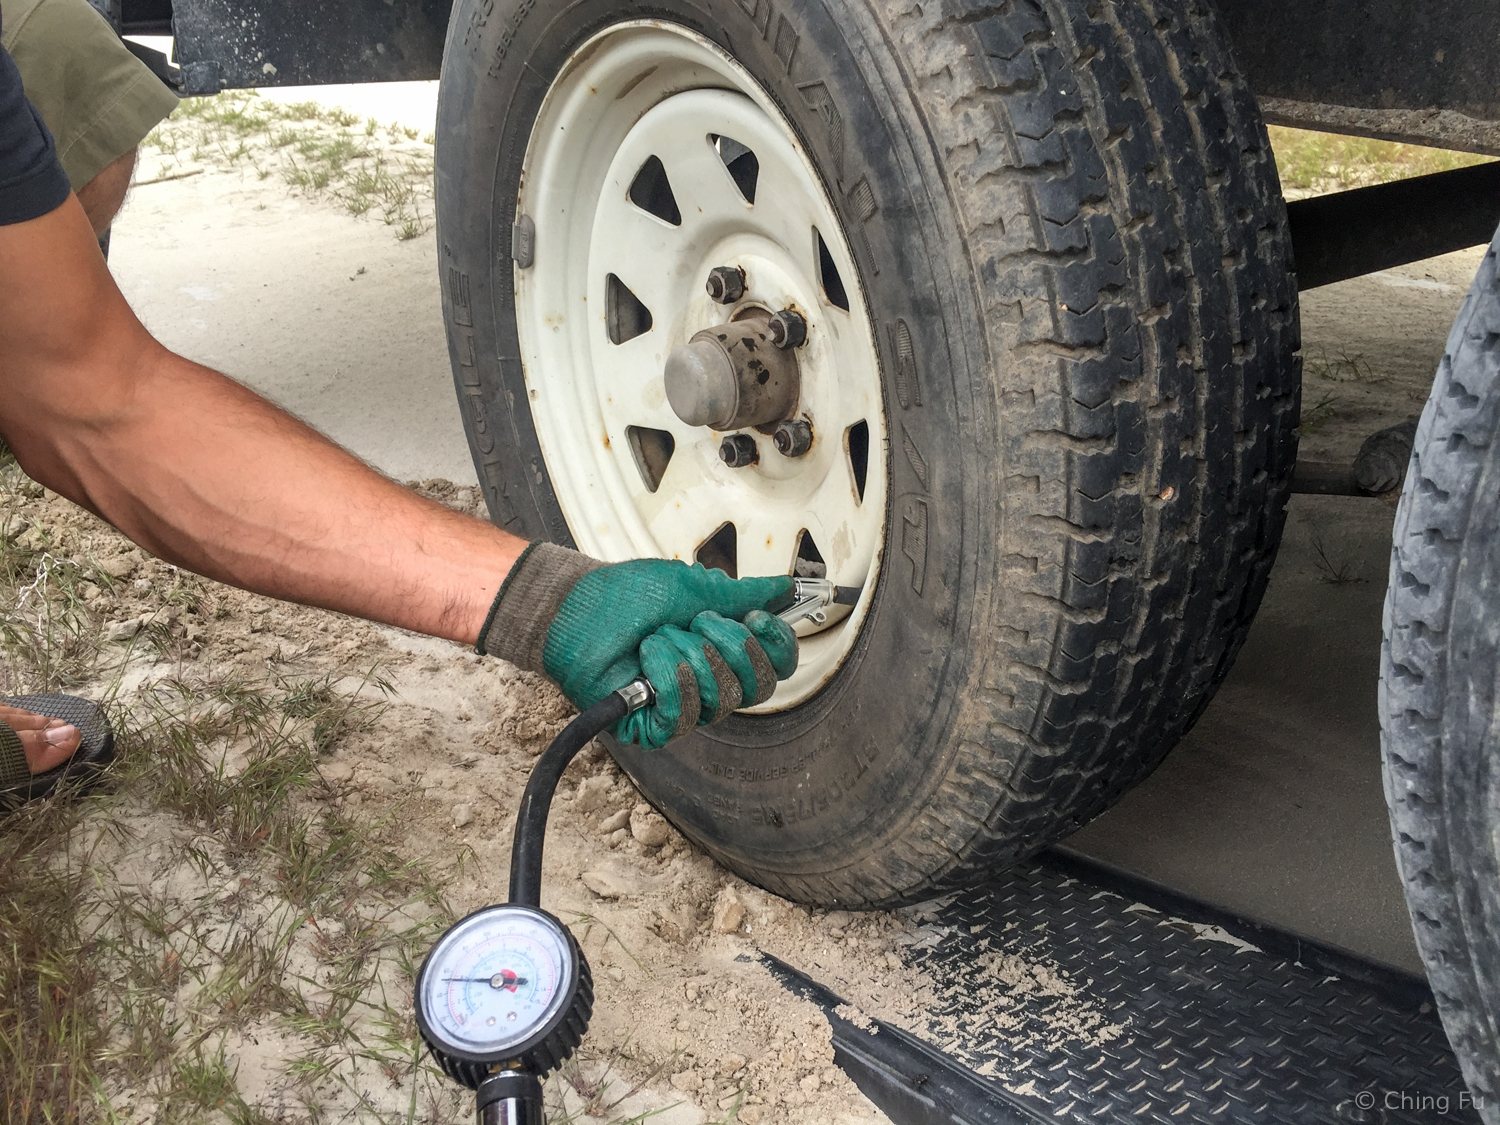  Step #15: Double check the air pressure in the newly installed tire along with your other tires. 